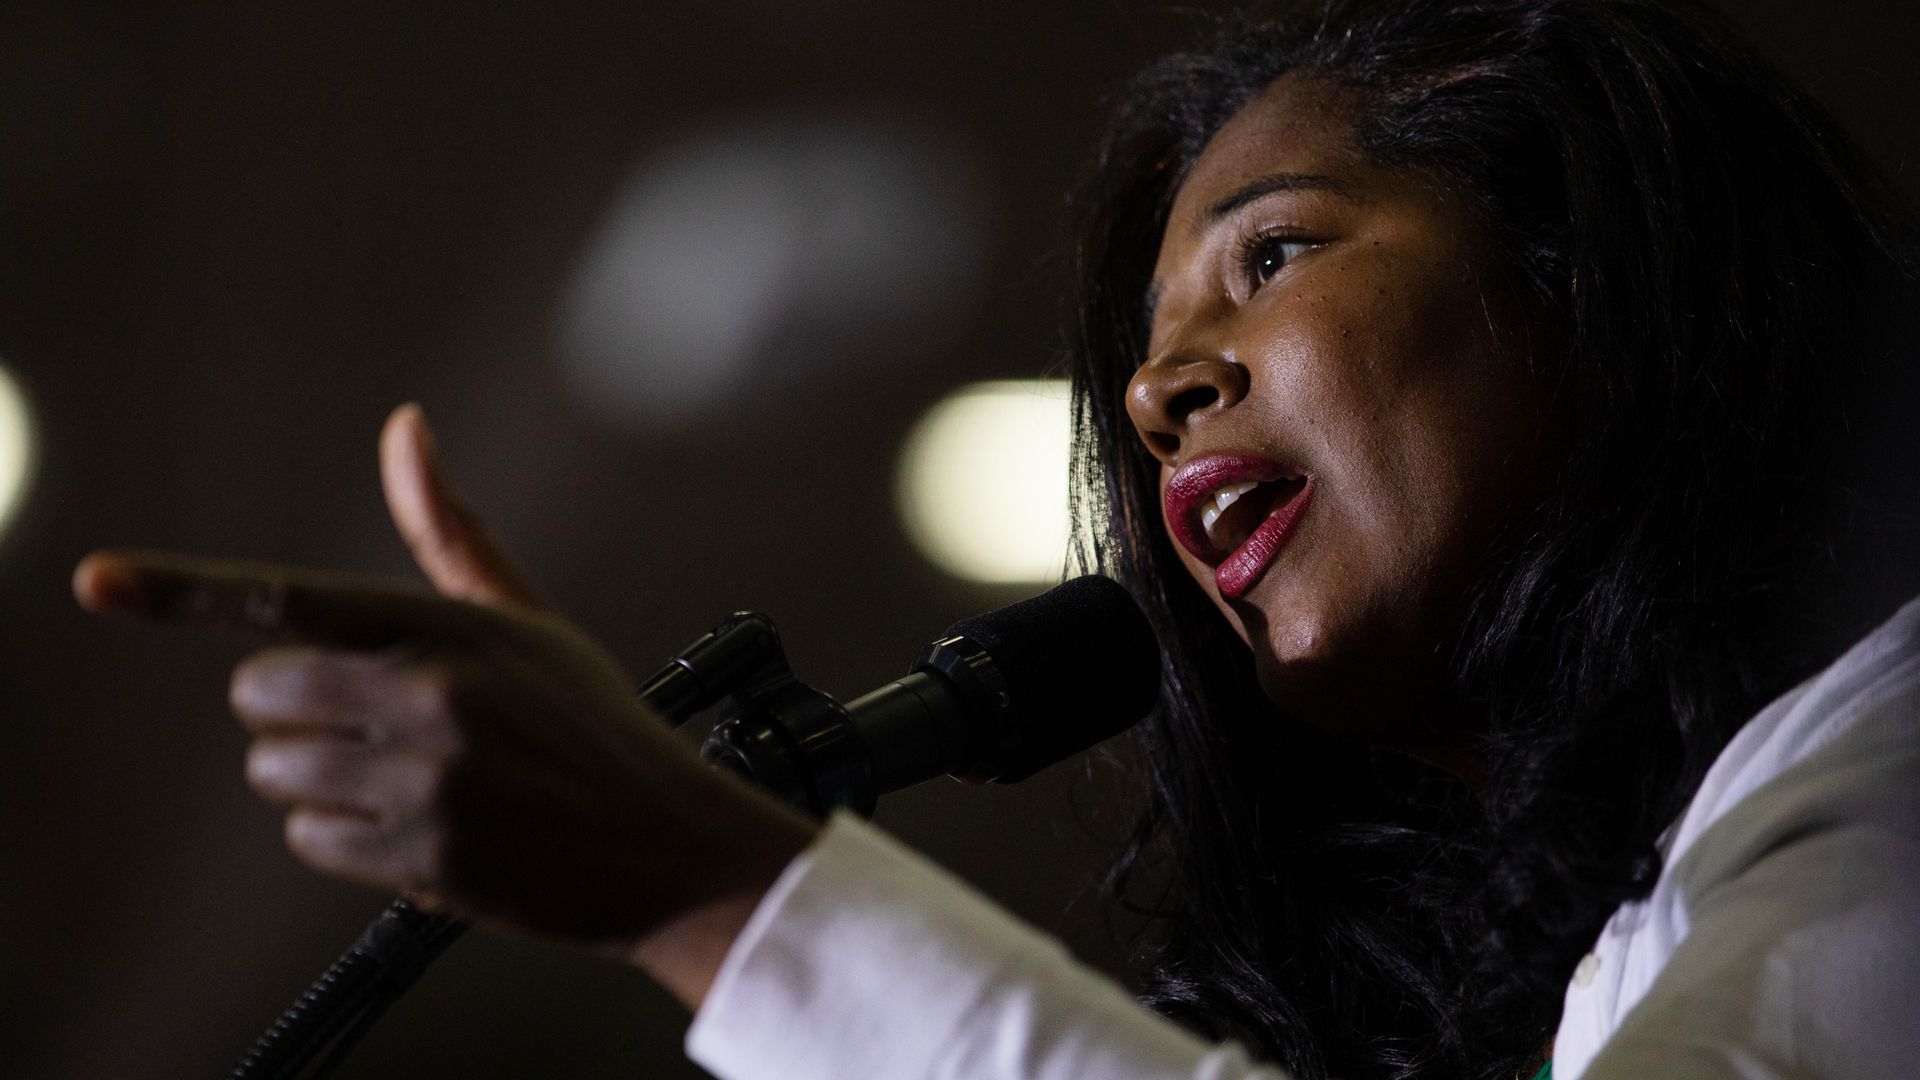 Republican candidate for Secretary of State Kristina Karamo speaks during a Save America rally on October 1, 2022 in Warren, Michigan.